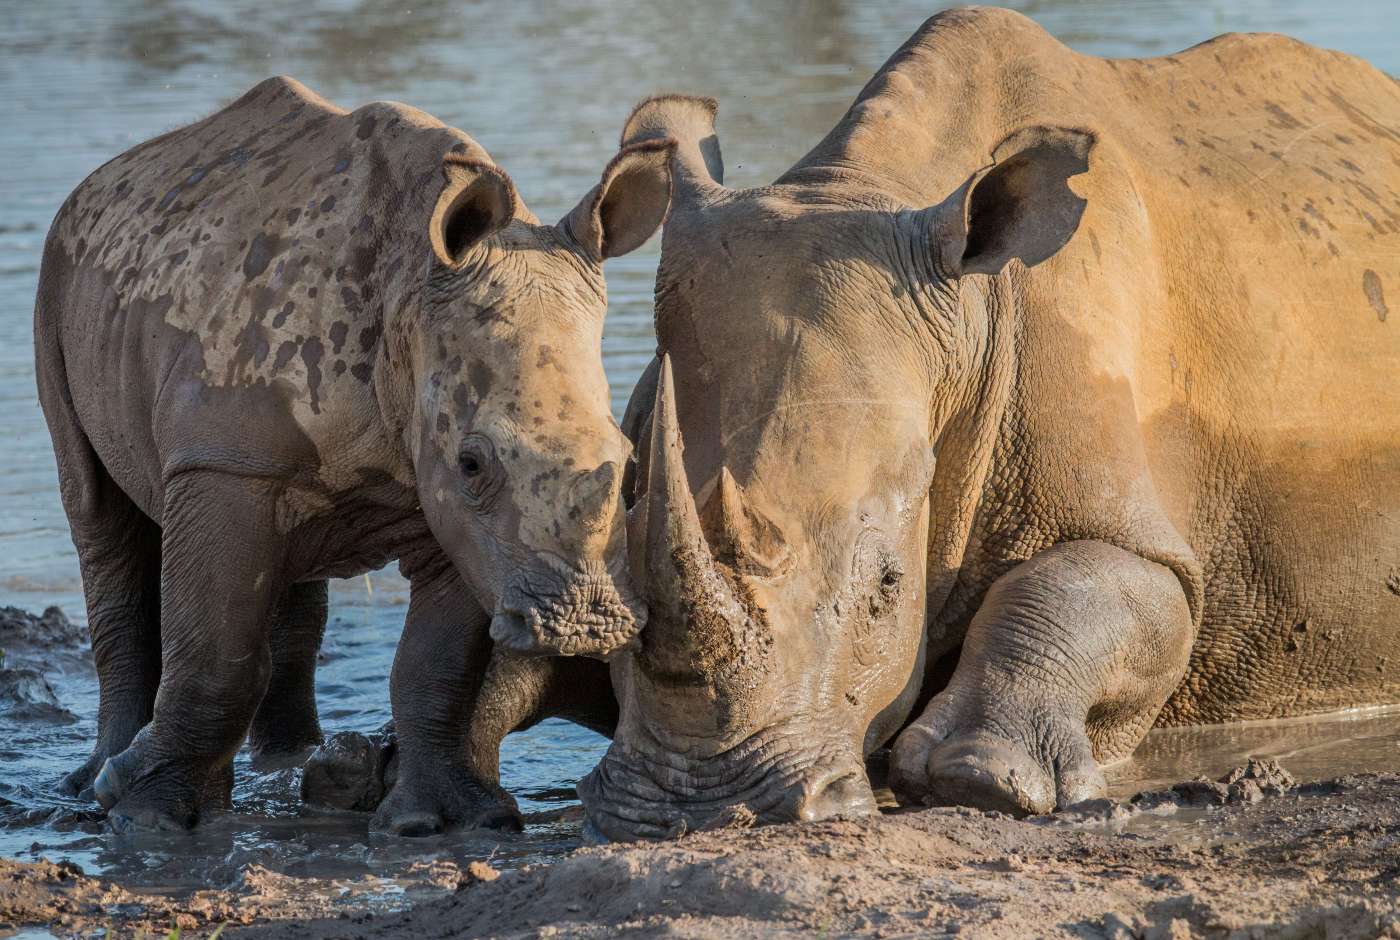 A baby rhino plays with its parent in the mud with water in the background